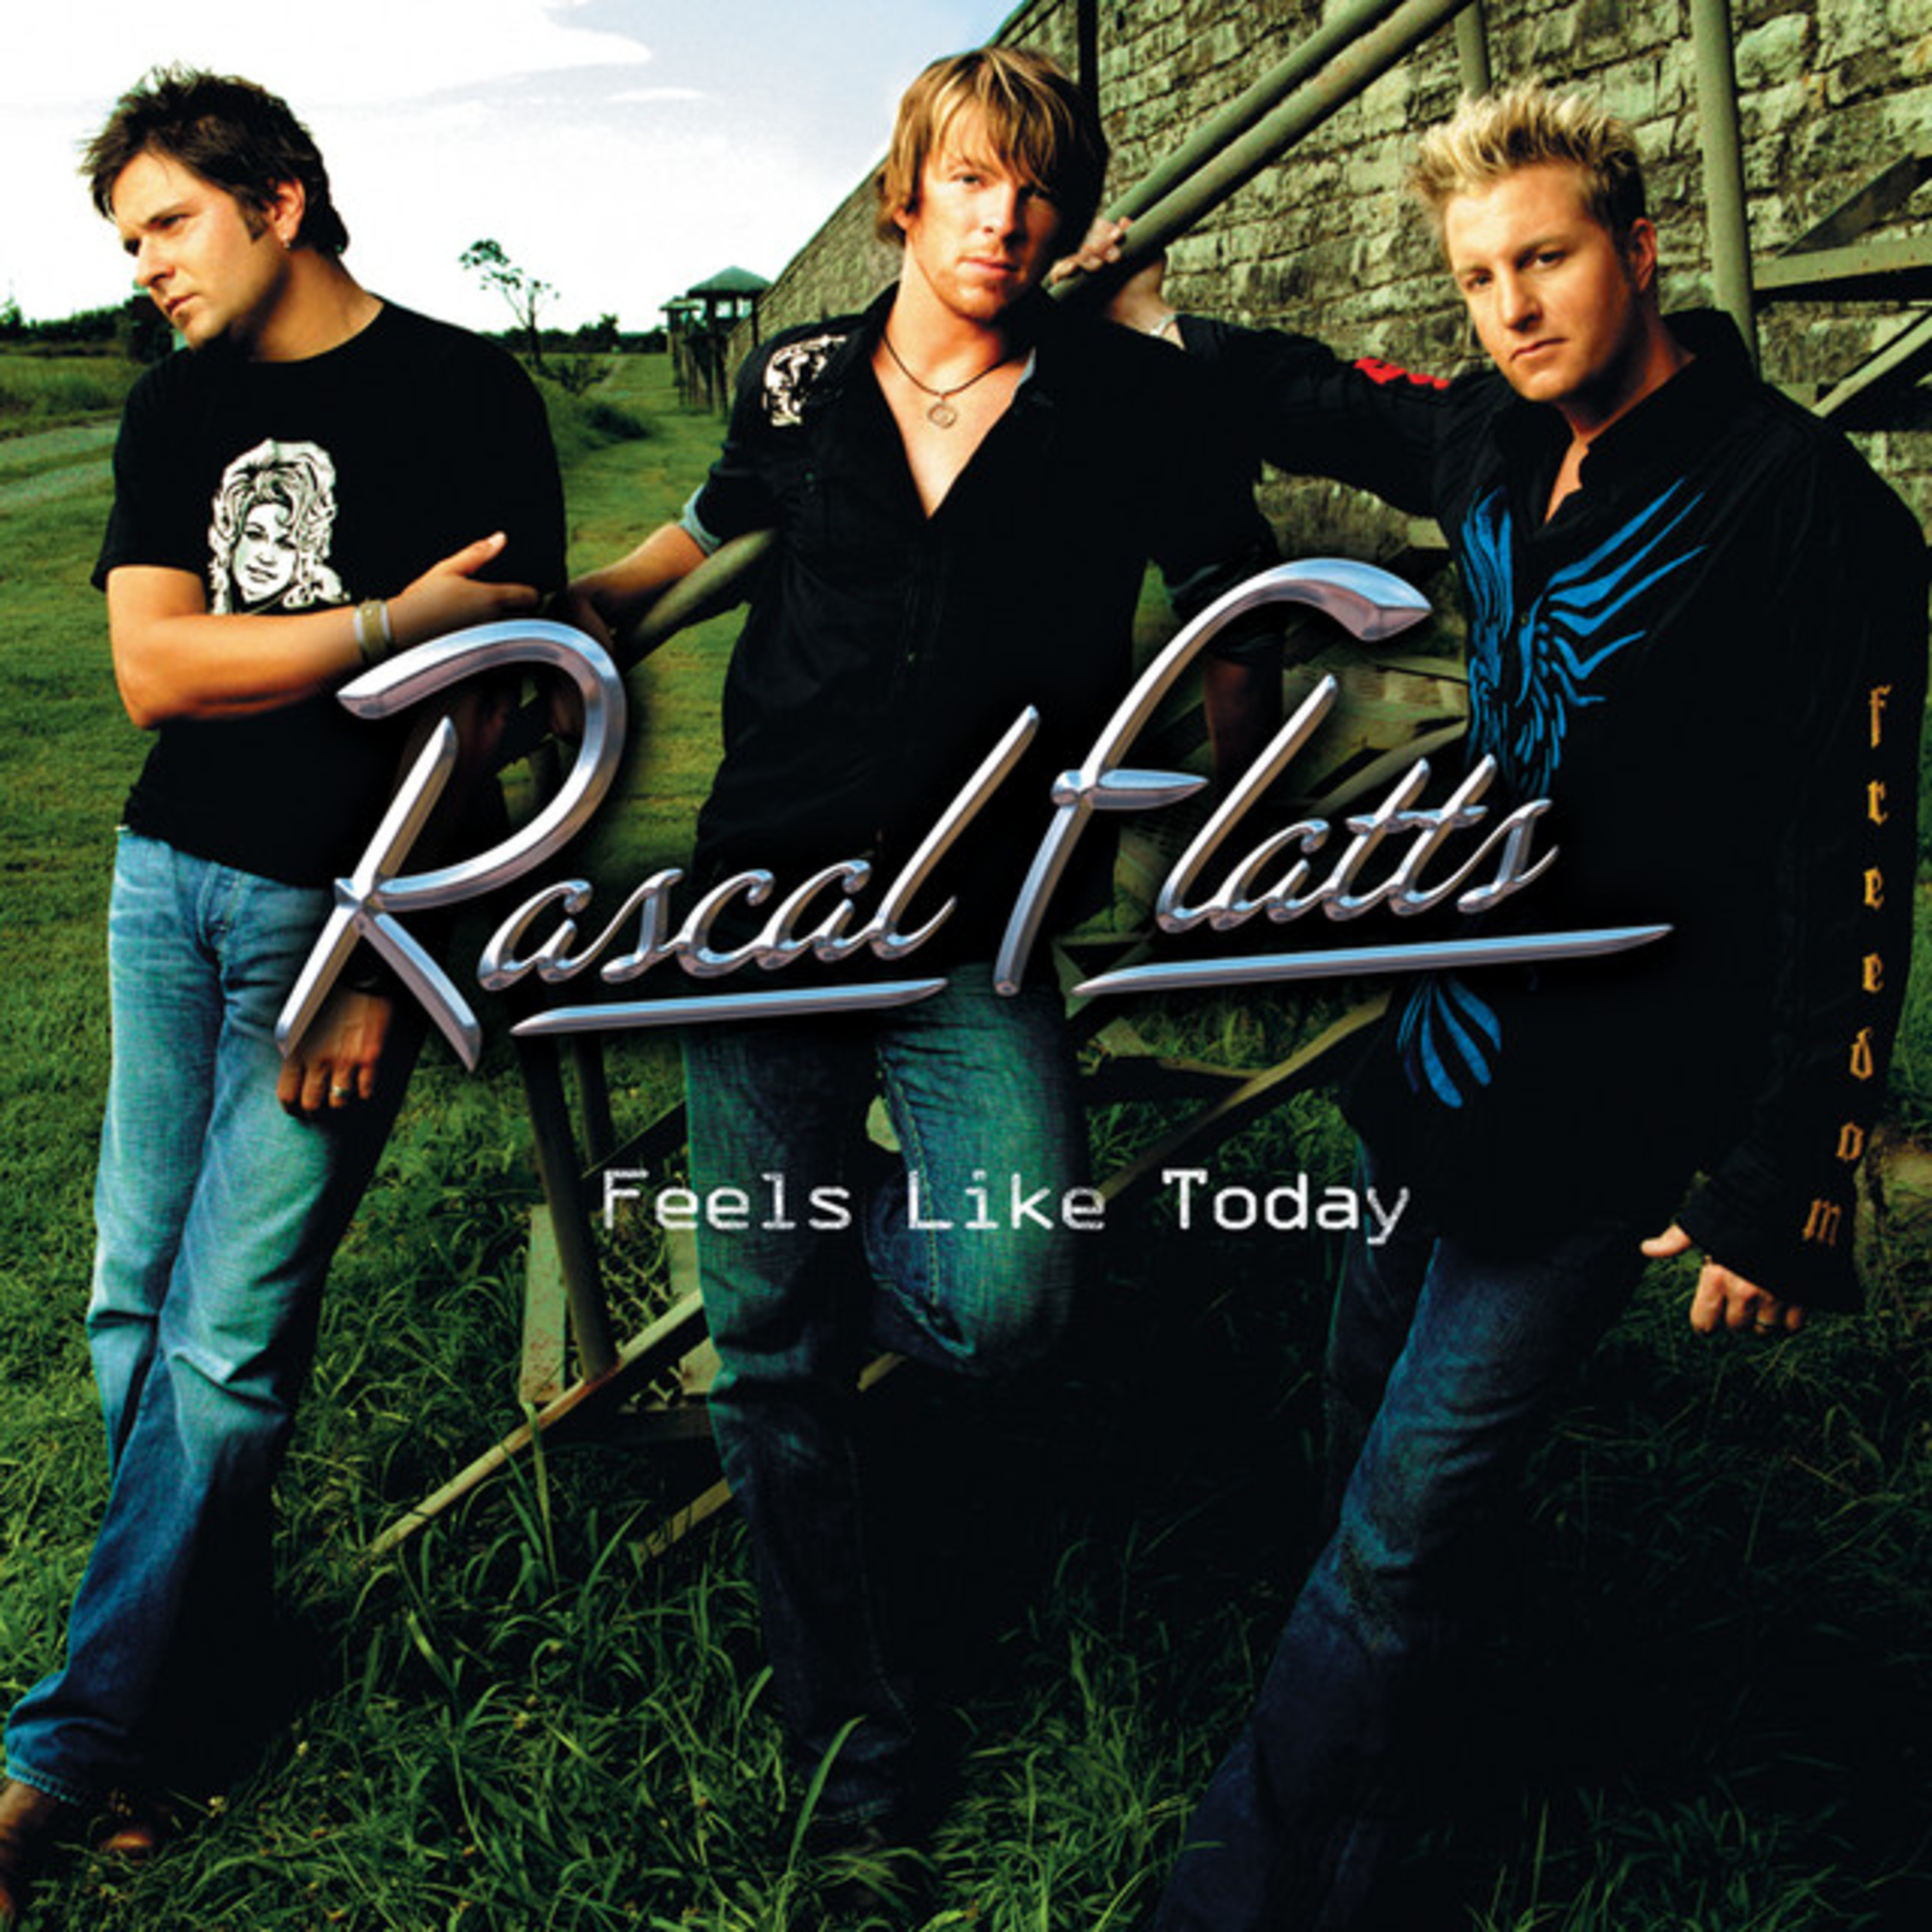 <p>Rascal Flatts' third album, <em>Feels Like Today</em>, became one of the group's best-selling albums. The project featured four singles, including "Bless The Broken Road," "<a href="https://www.youtube.com/watch?v=Ipygbwsv-rc">Fast Cars And Freedom,"</a> and the album title track. <em>Feels Like Today</em> topped both the Country Album and <em>Billboard</em> 200 charts. </p><p><a href='https://www.msn.com/en-us/community/channel/vid-cj9pqbr0vn9in2b6ddcd8sfgpfq6x6utp44fssrv6mc2gtybw0us'>Follow us on MSN to see more of our exclusive entertainment content.</a></p>